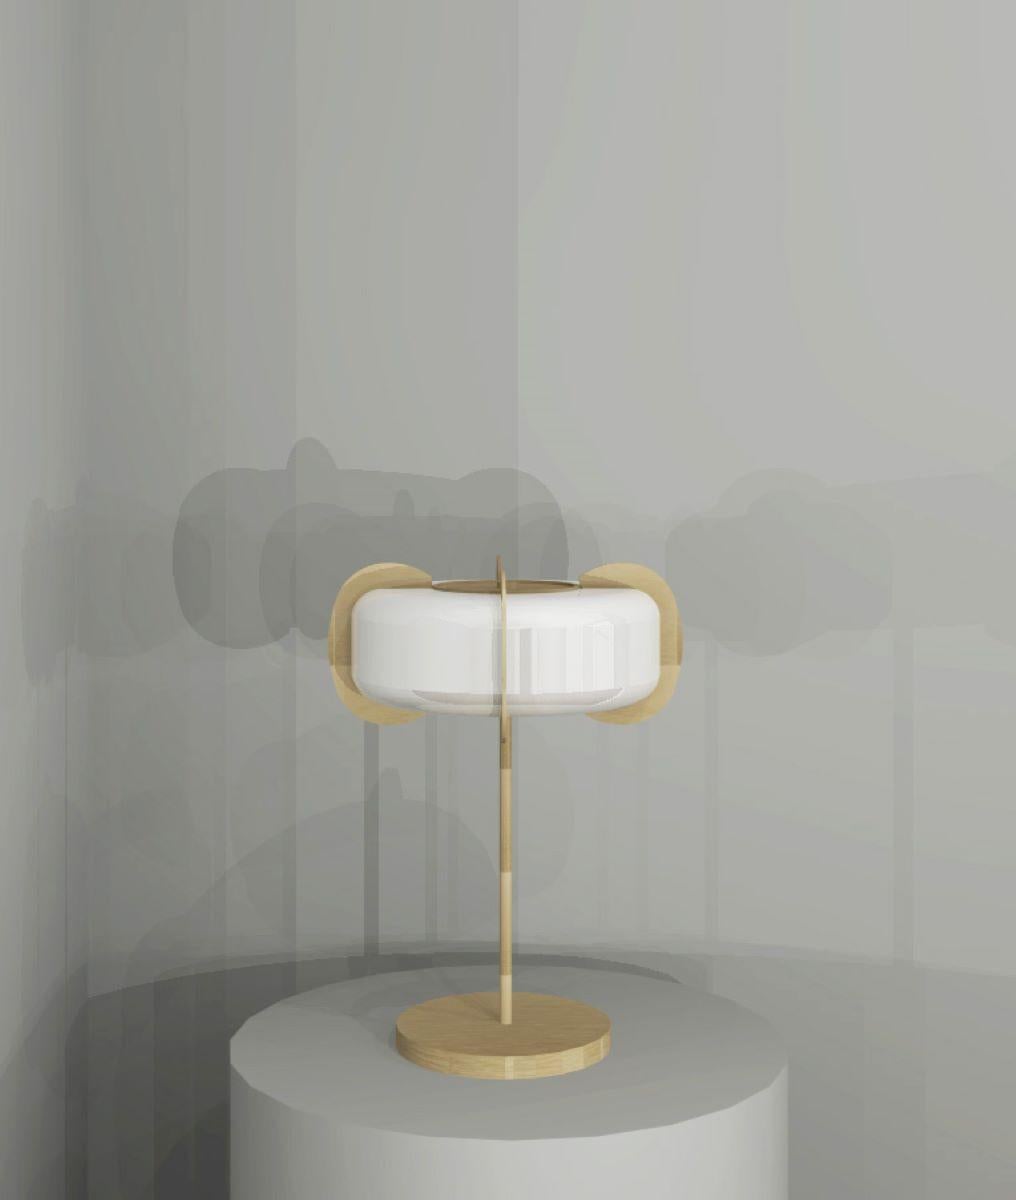 Art Deco form, but Minimalist design remains. This table lamp is crafted from solid brass and white glass. A sculptural design formed from elegant oval frosted glass shade with brushed brass discs connected to the top and bottom diffusers that go